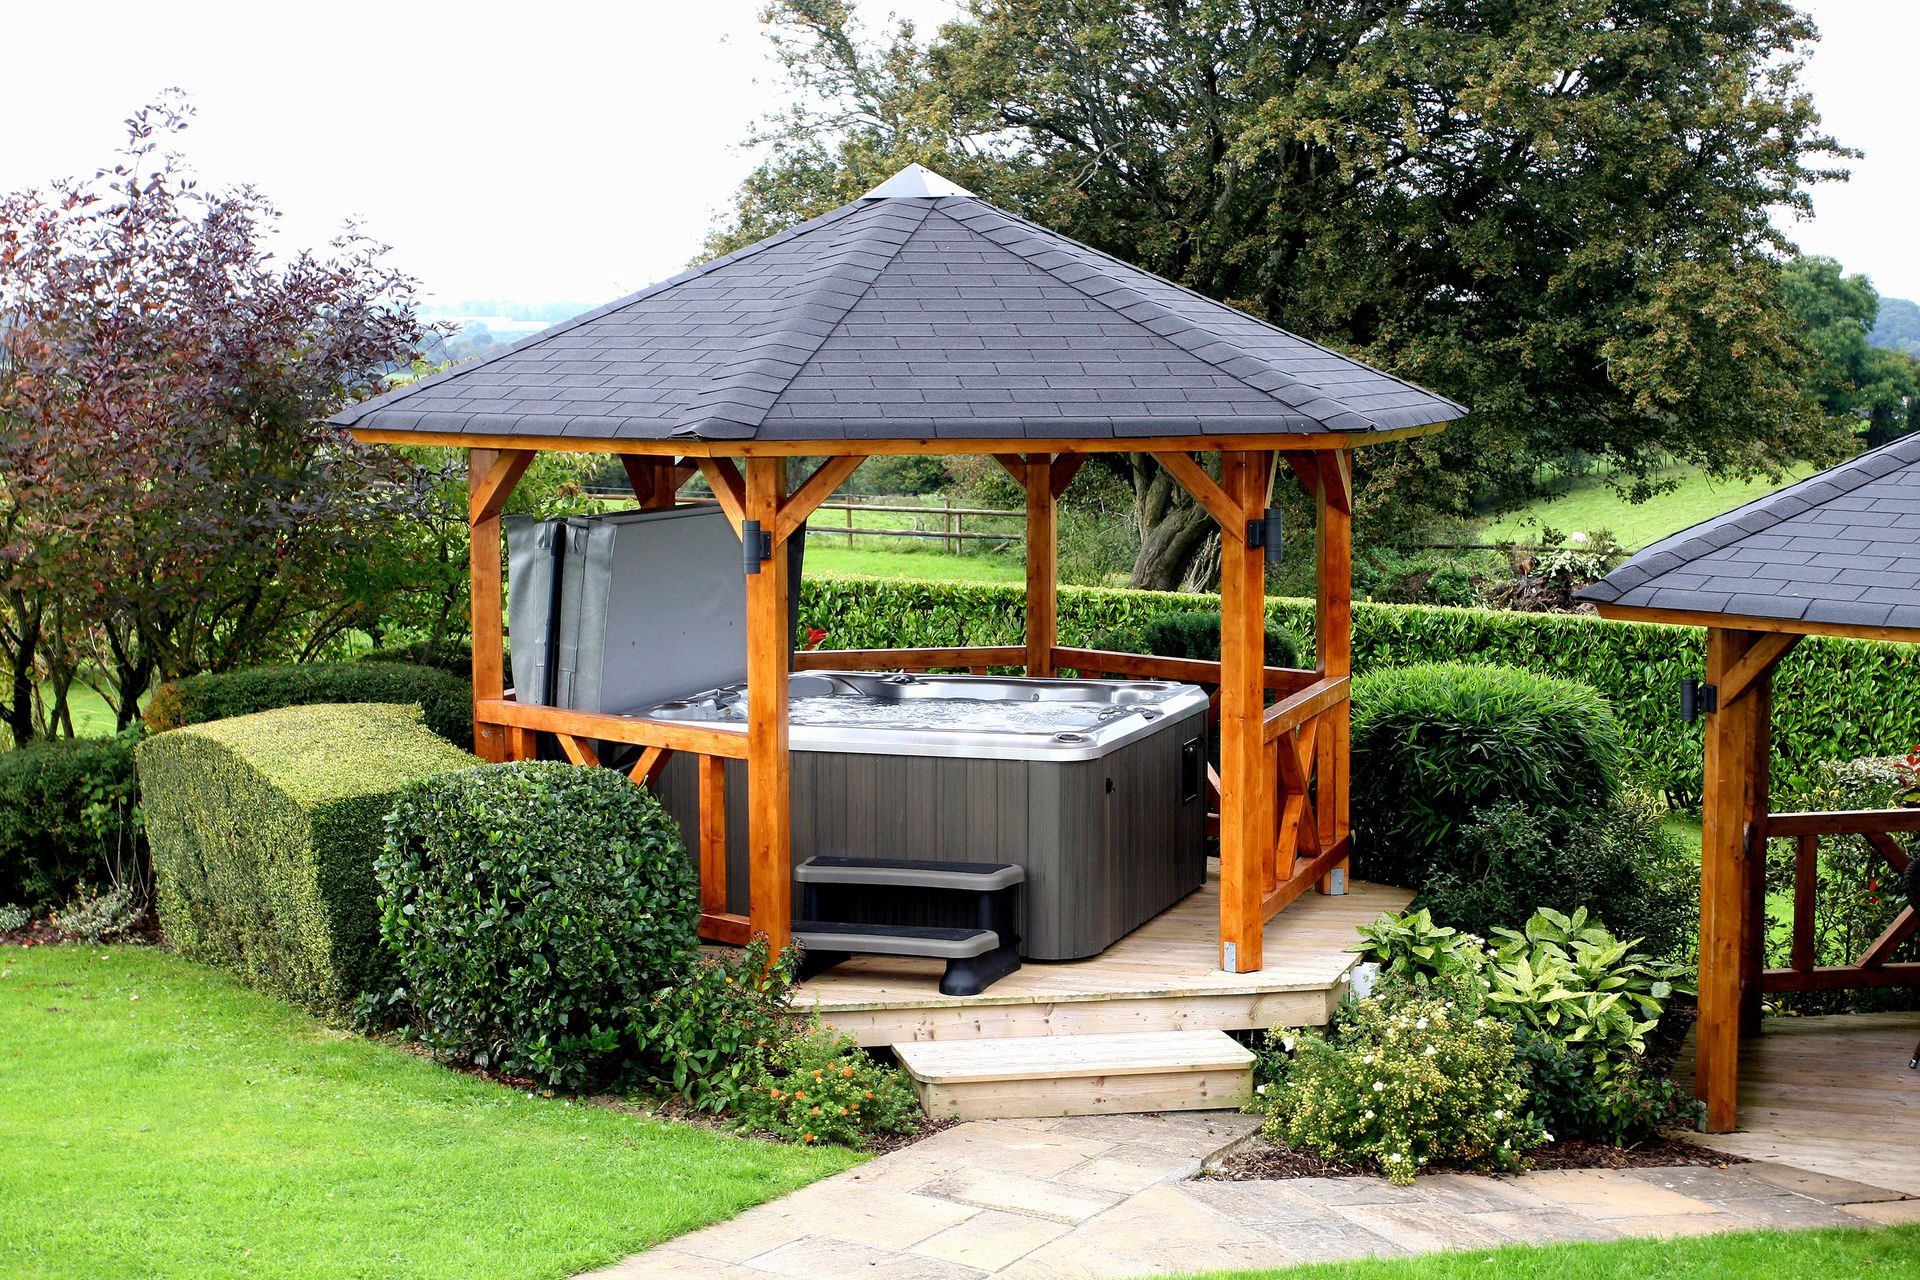 <p>                     A structured hot tub gazebo creates a dedicated outdoor relaxation 'room'. And as well as adding definition to the zone, the roof will keep heavy rain and winds away, keeping it a sheltered sanctuary whatever the weather. Lush green foliage surrounding it will up the zen-appeal, too.                   </p>                                      <p>                     Match the materials to the rest of your garden structures for a cohesive feel.                   </p>